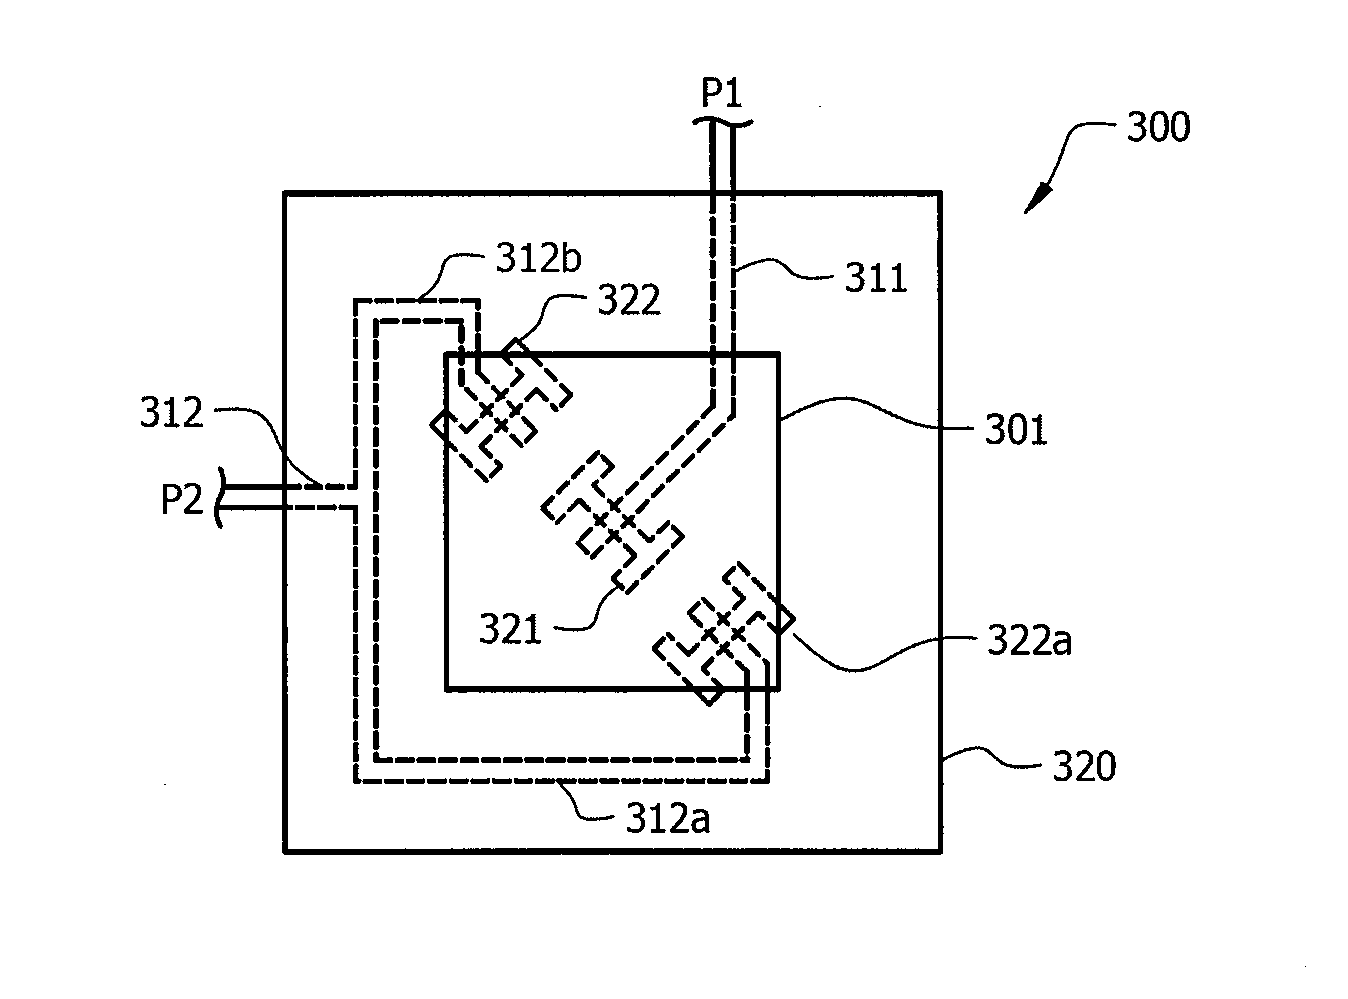 Symmetrical partially coupled microstrip slot feed patch antenna element